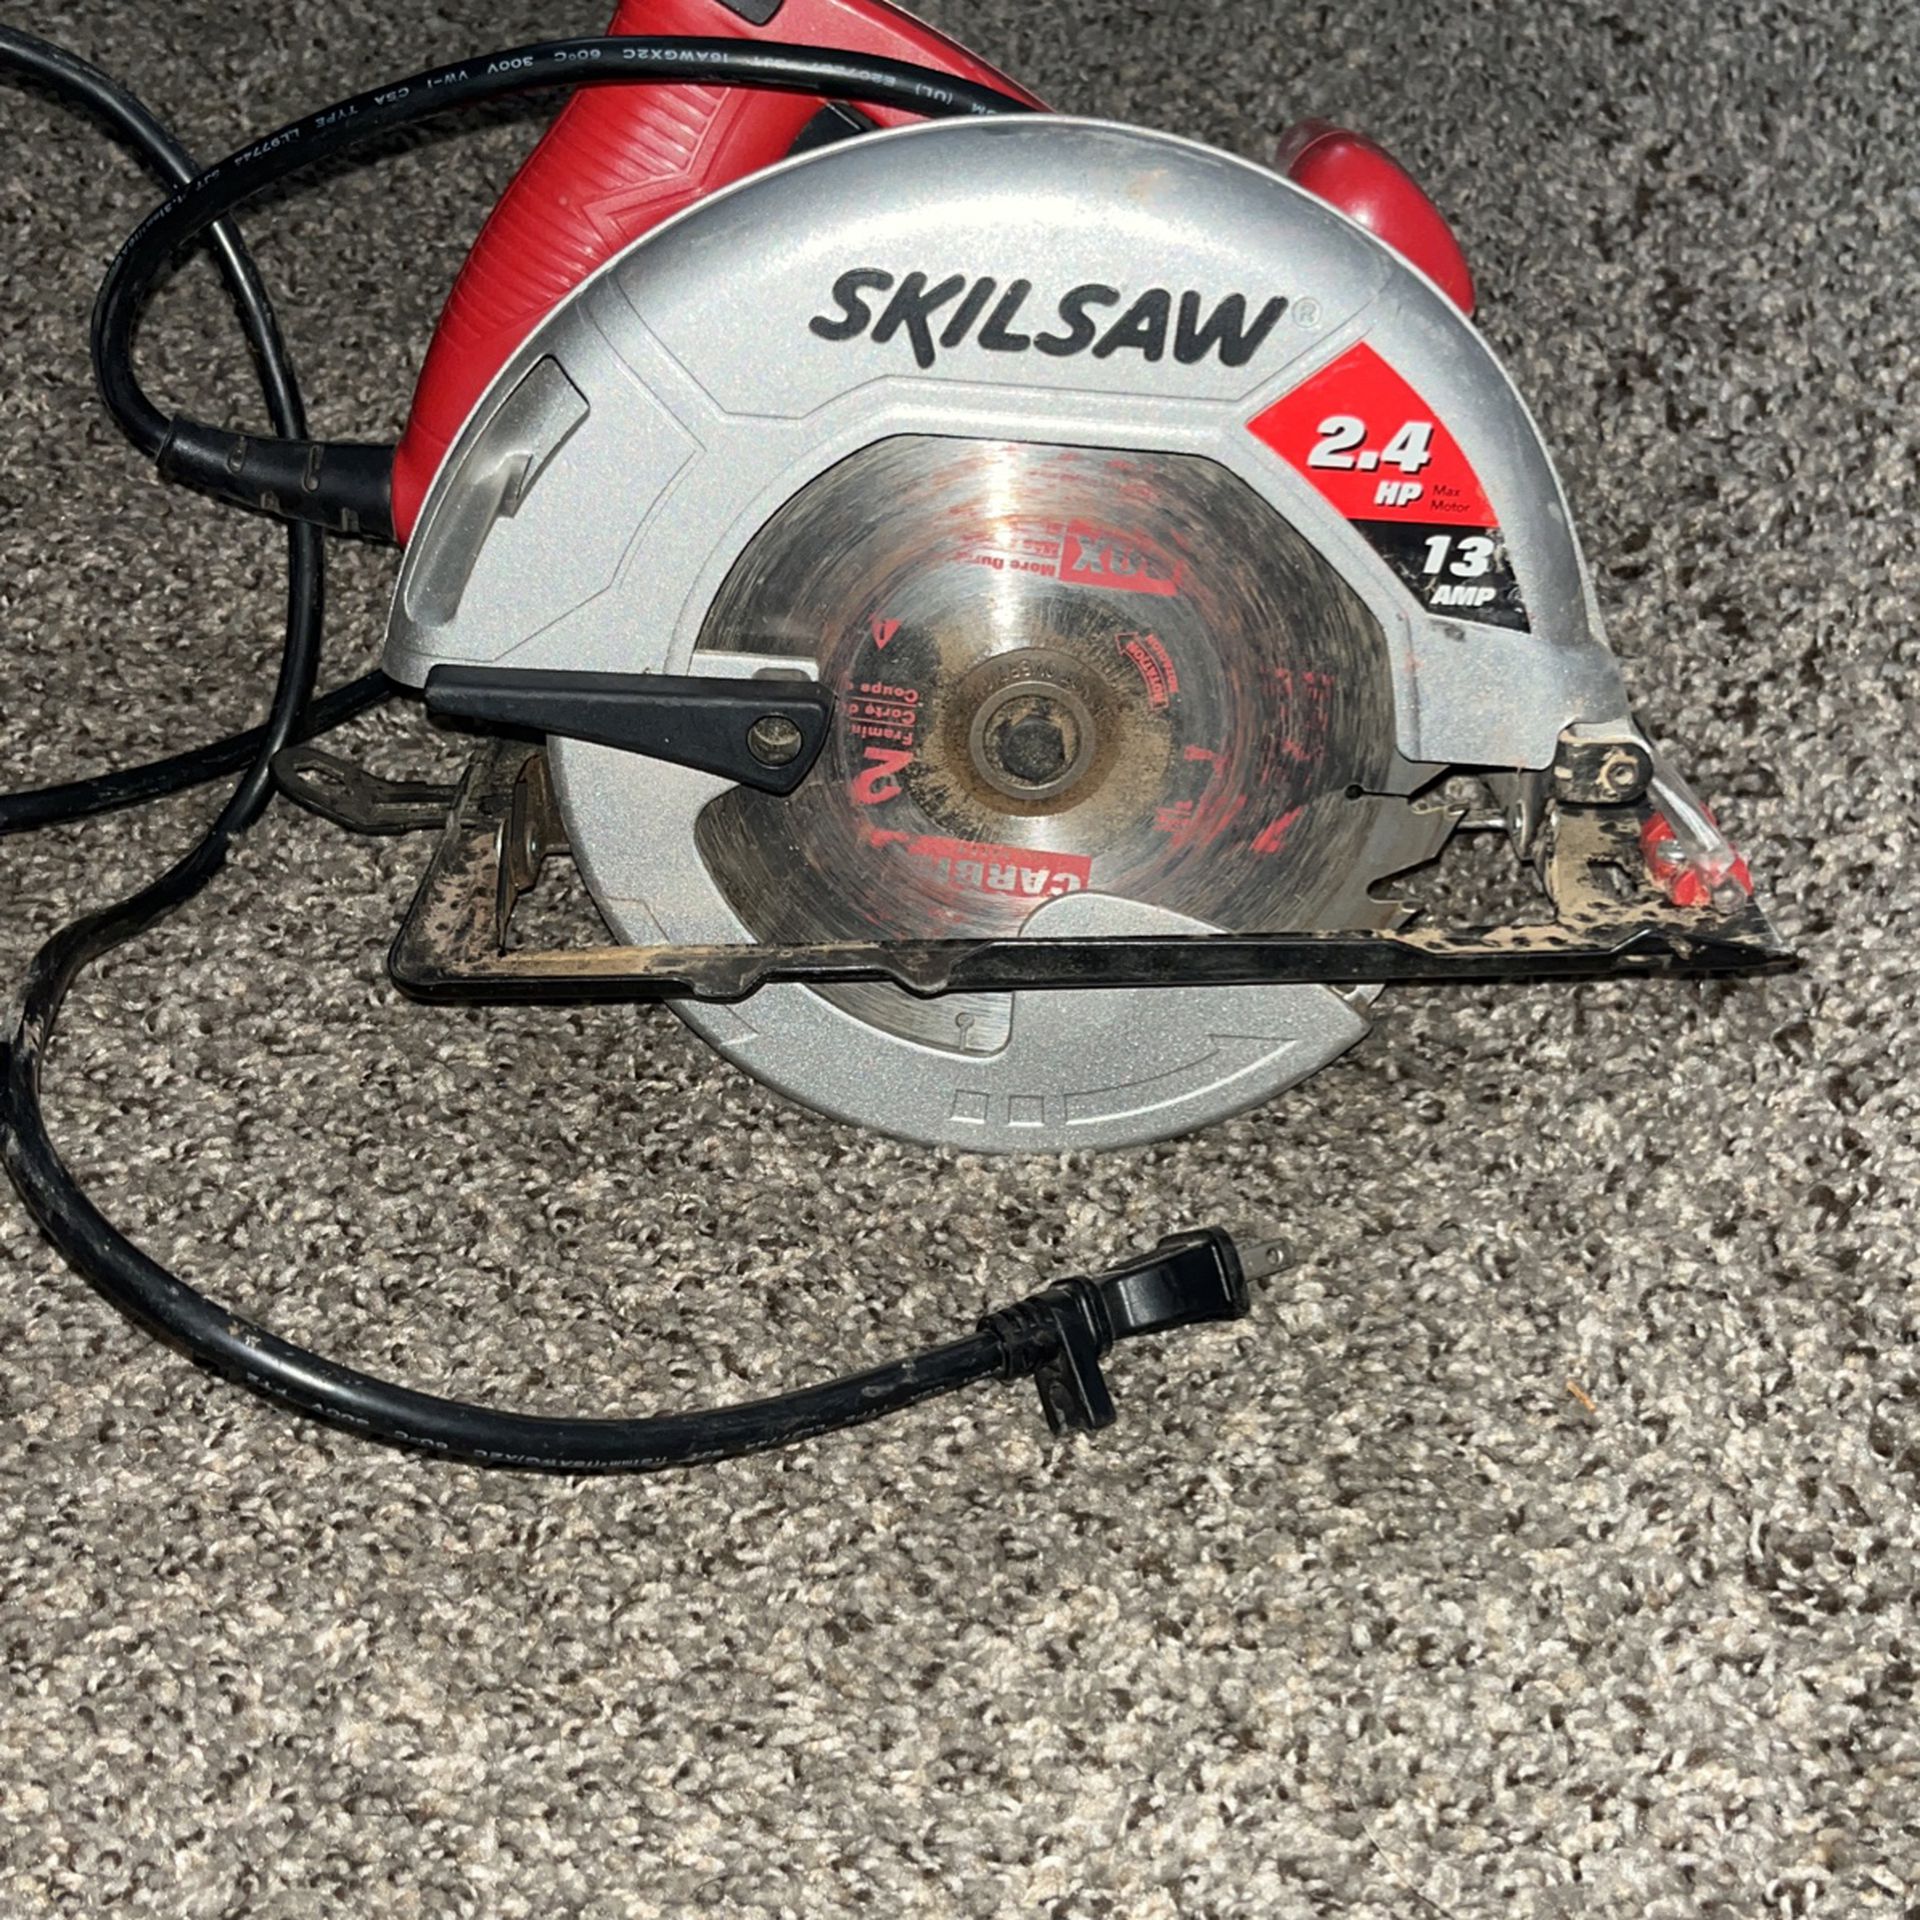 Skilsaw Table Saw 2.4hp, 13amp for Sale in El Paso, TX OfferUp